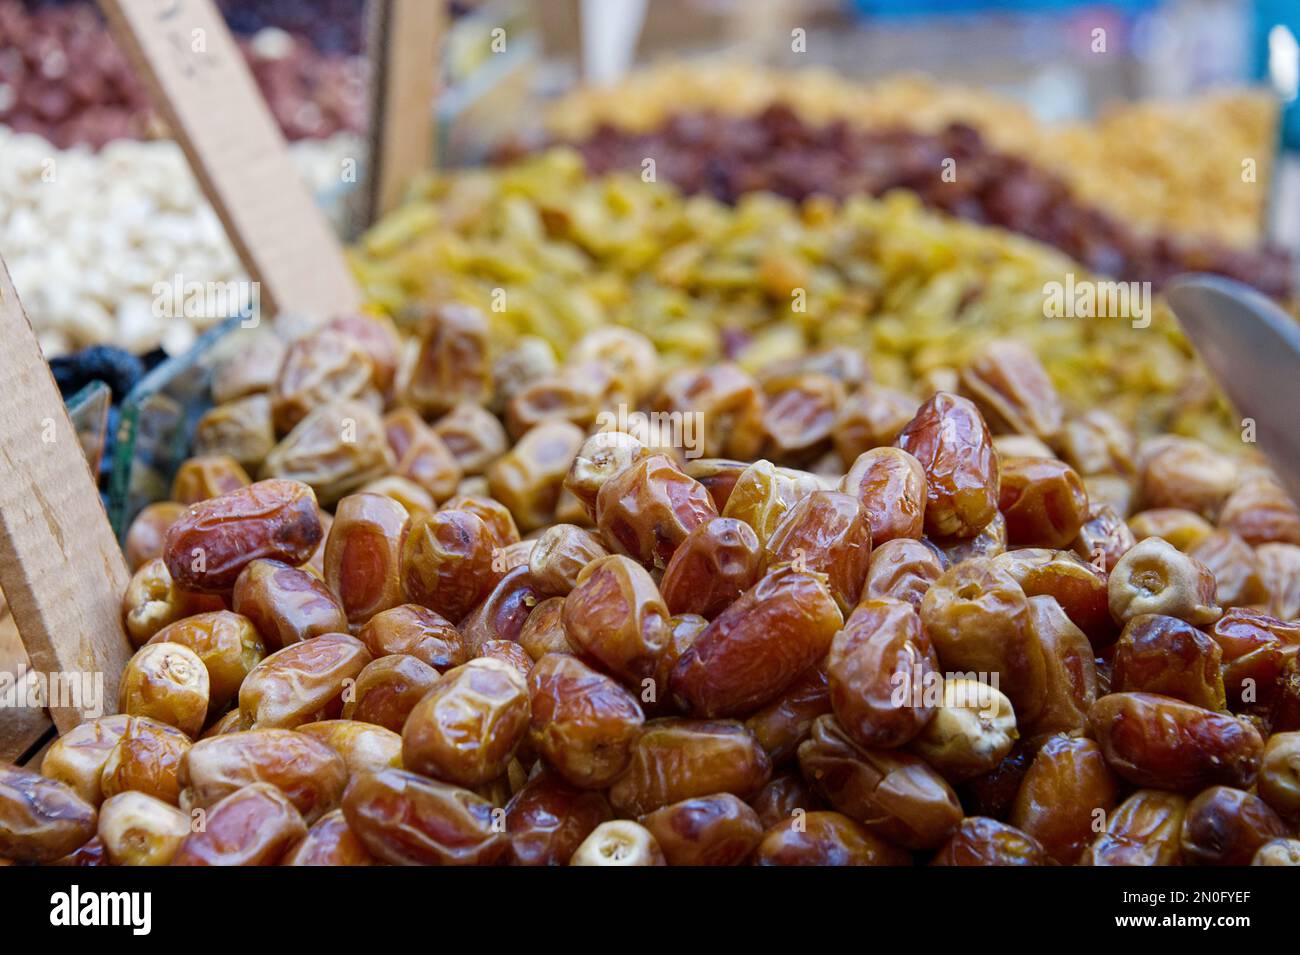 Sweet and delicious dates to buy at the local market in arabic lands Stock Photo